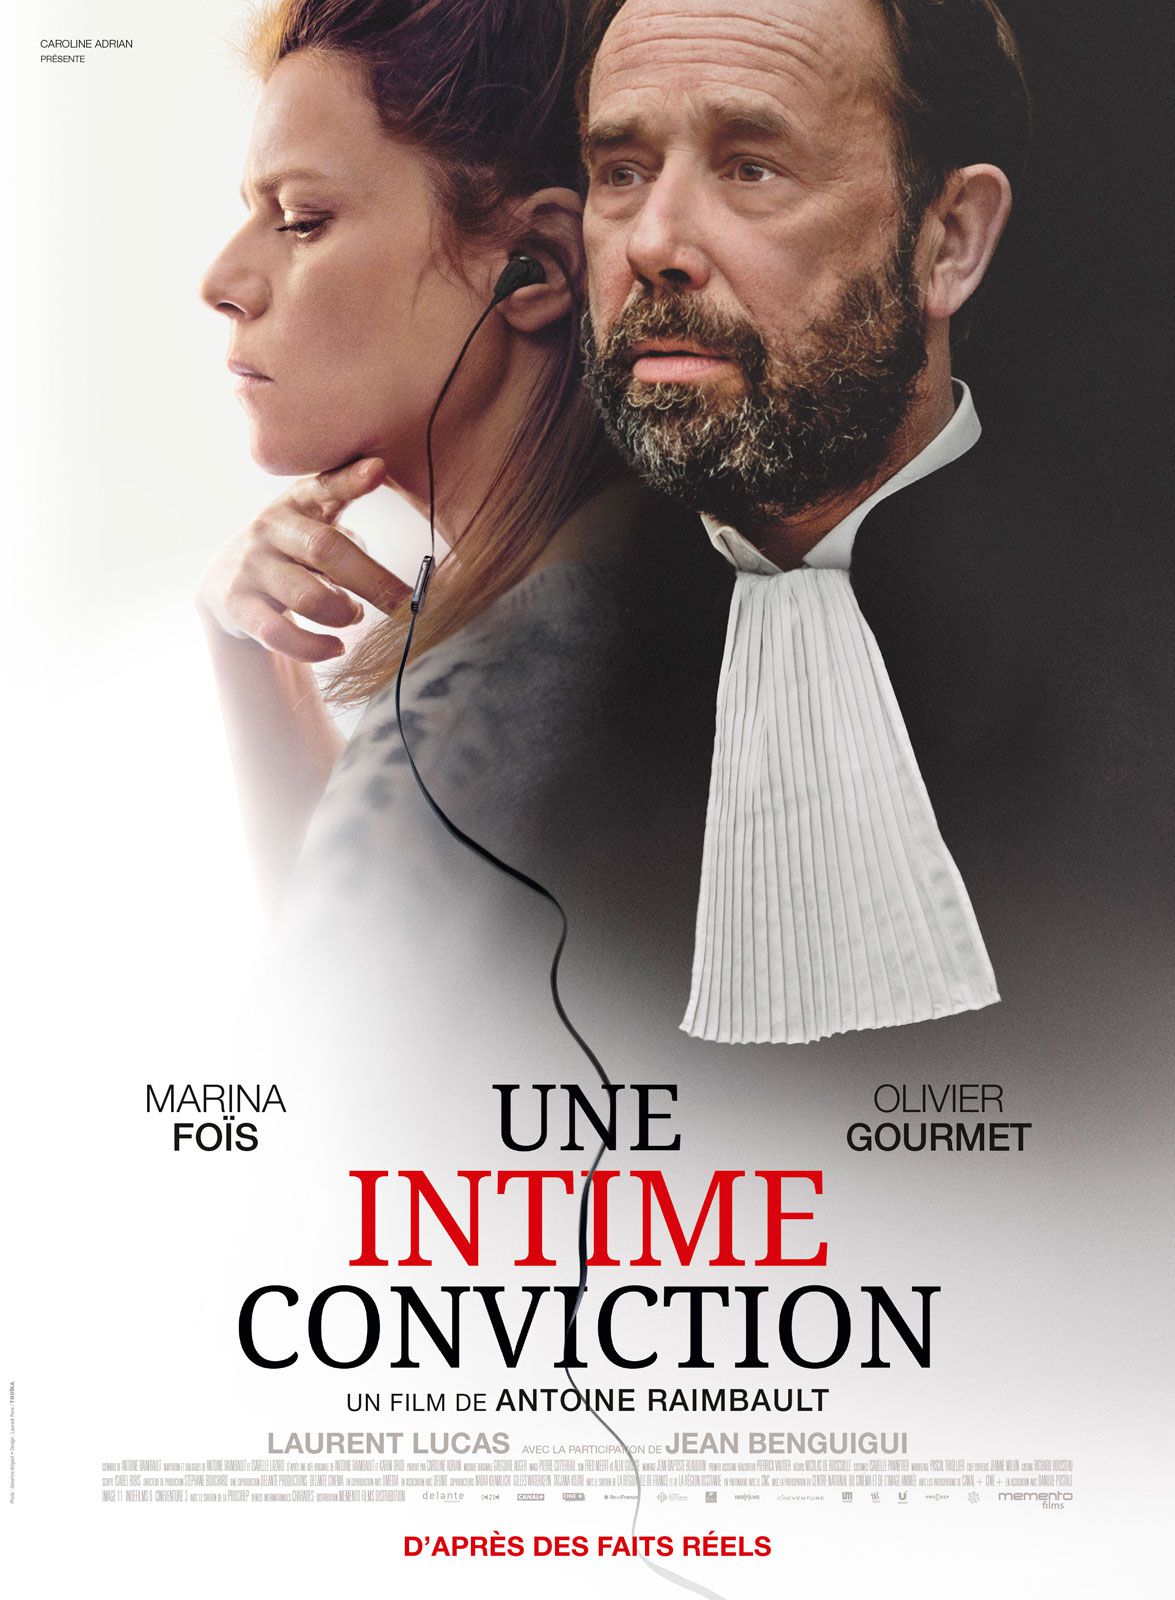 Une intime conviction - Film (2019) streaming VF gratuit complet